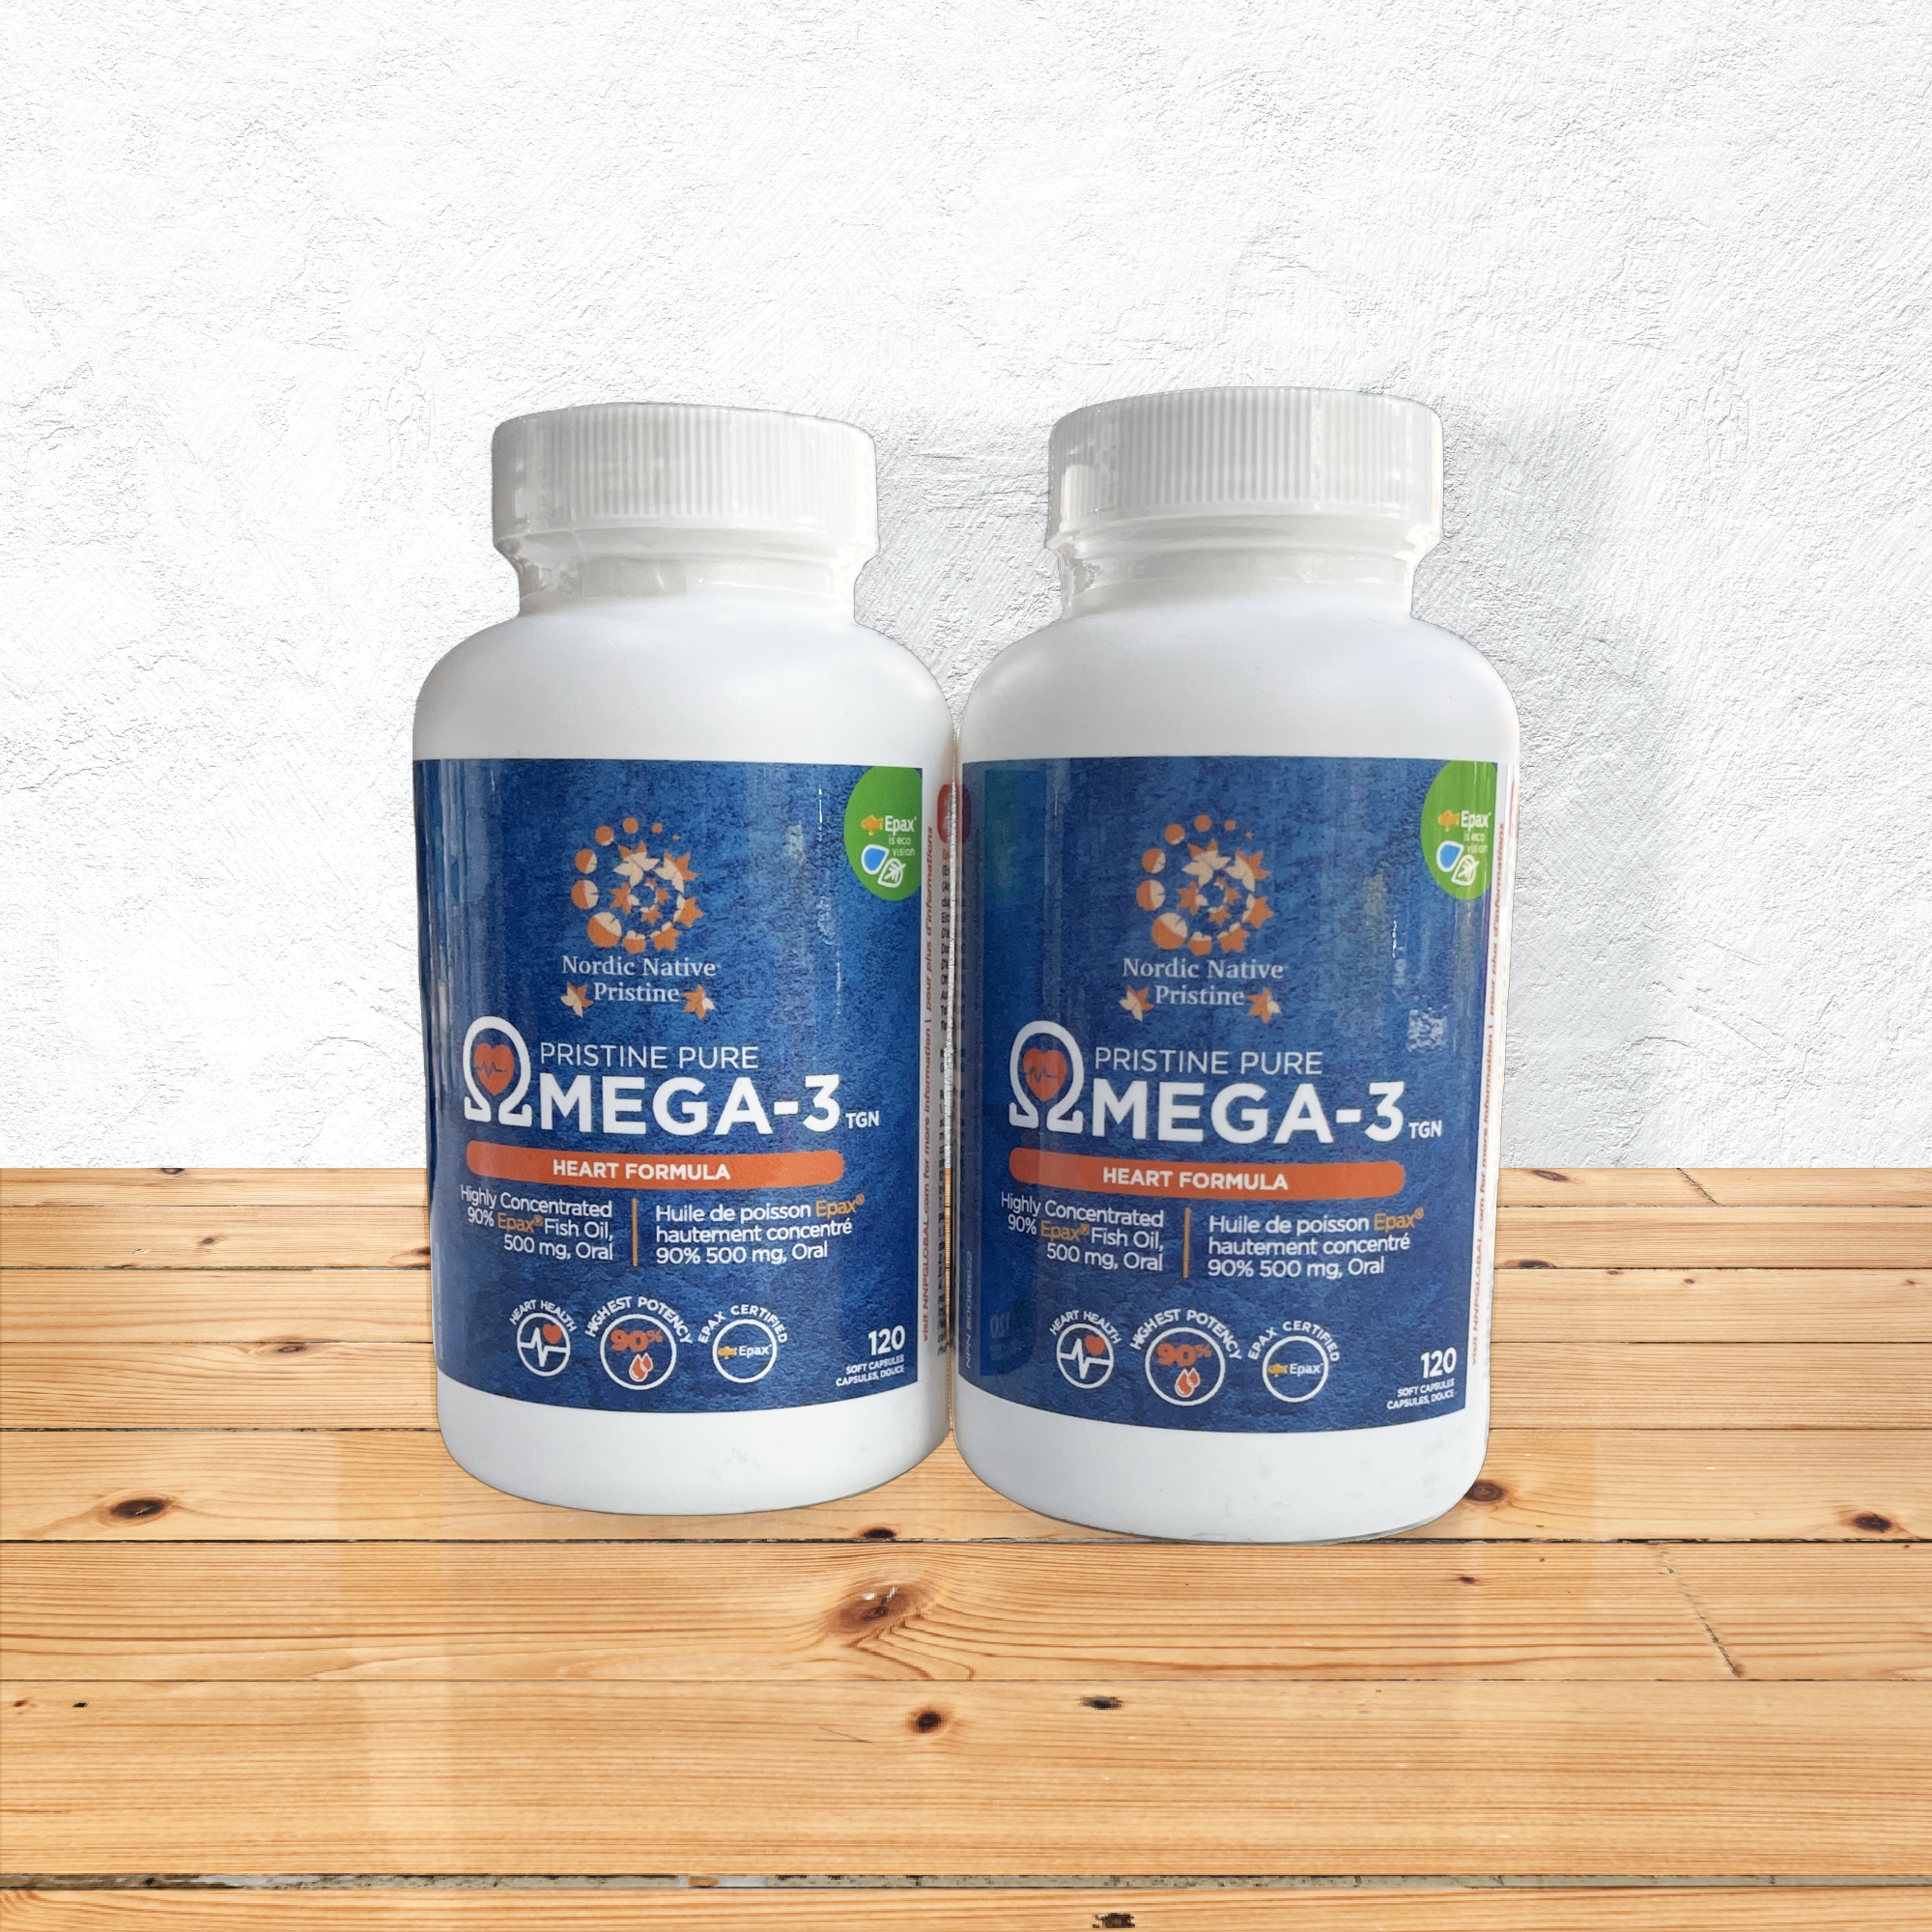 Nordic Native Pristine Omega-3 (120 caps) with potency of 90% concentrate, TGN form Fish Oil